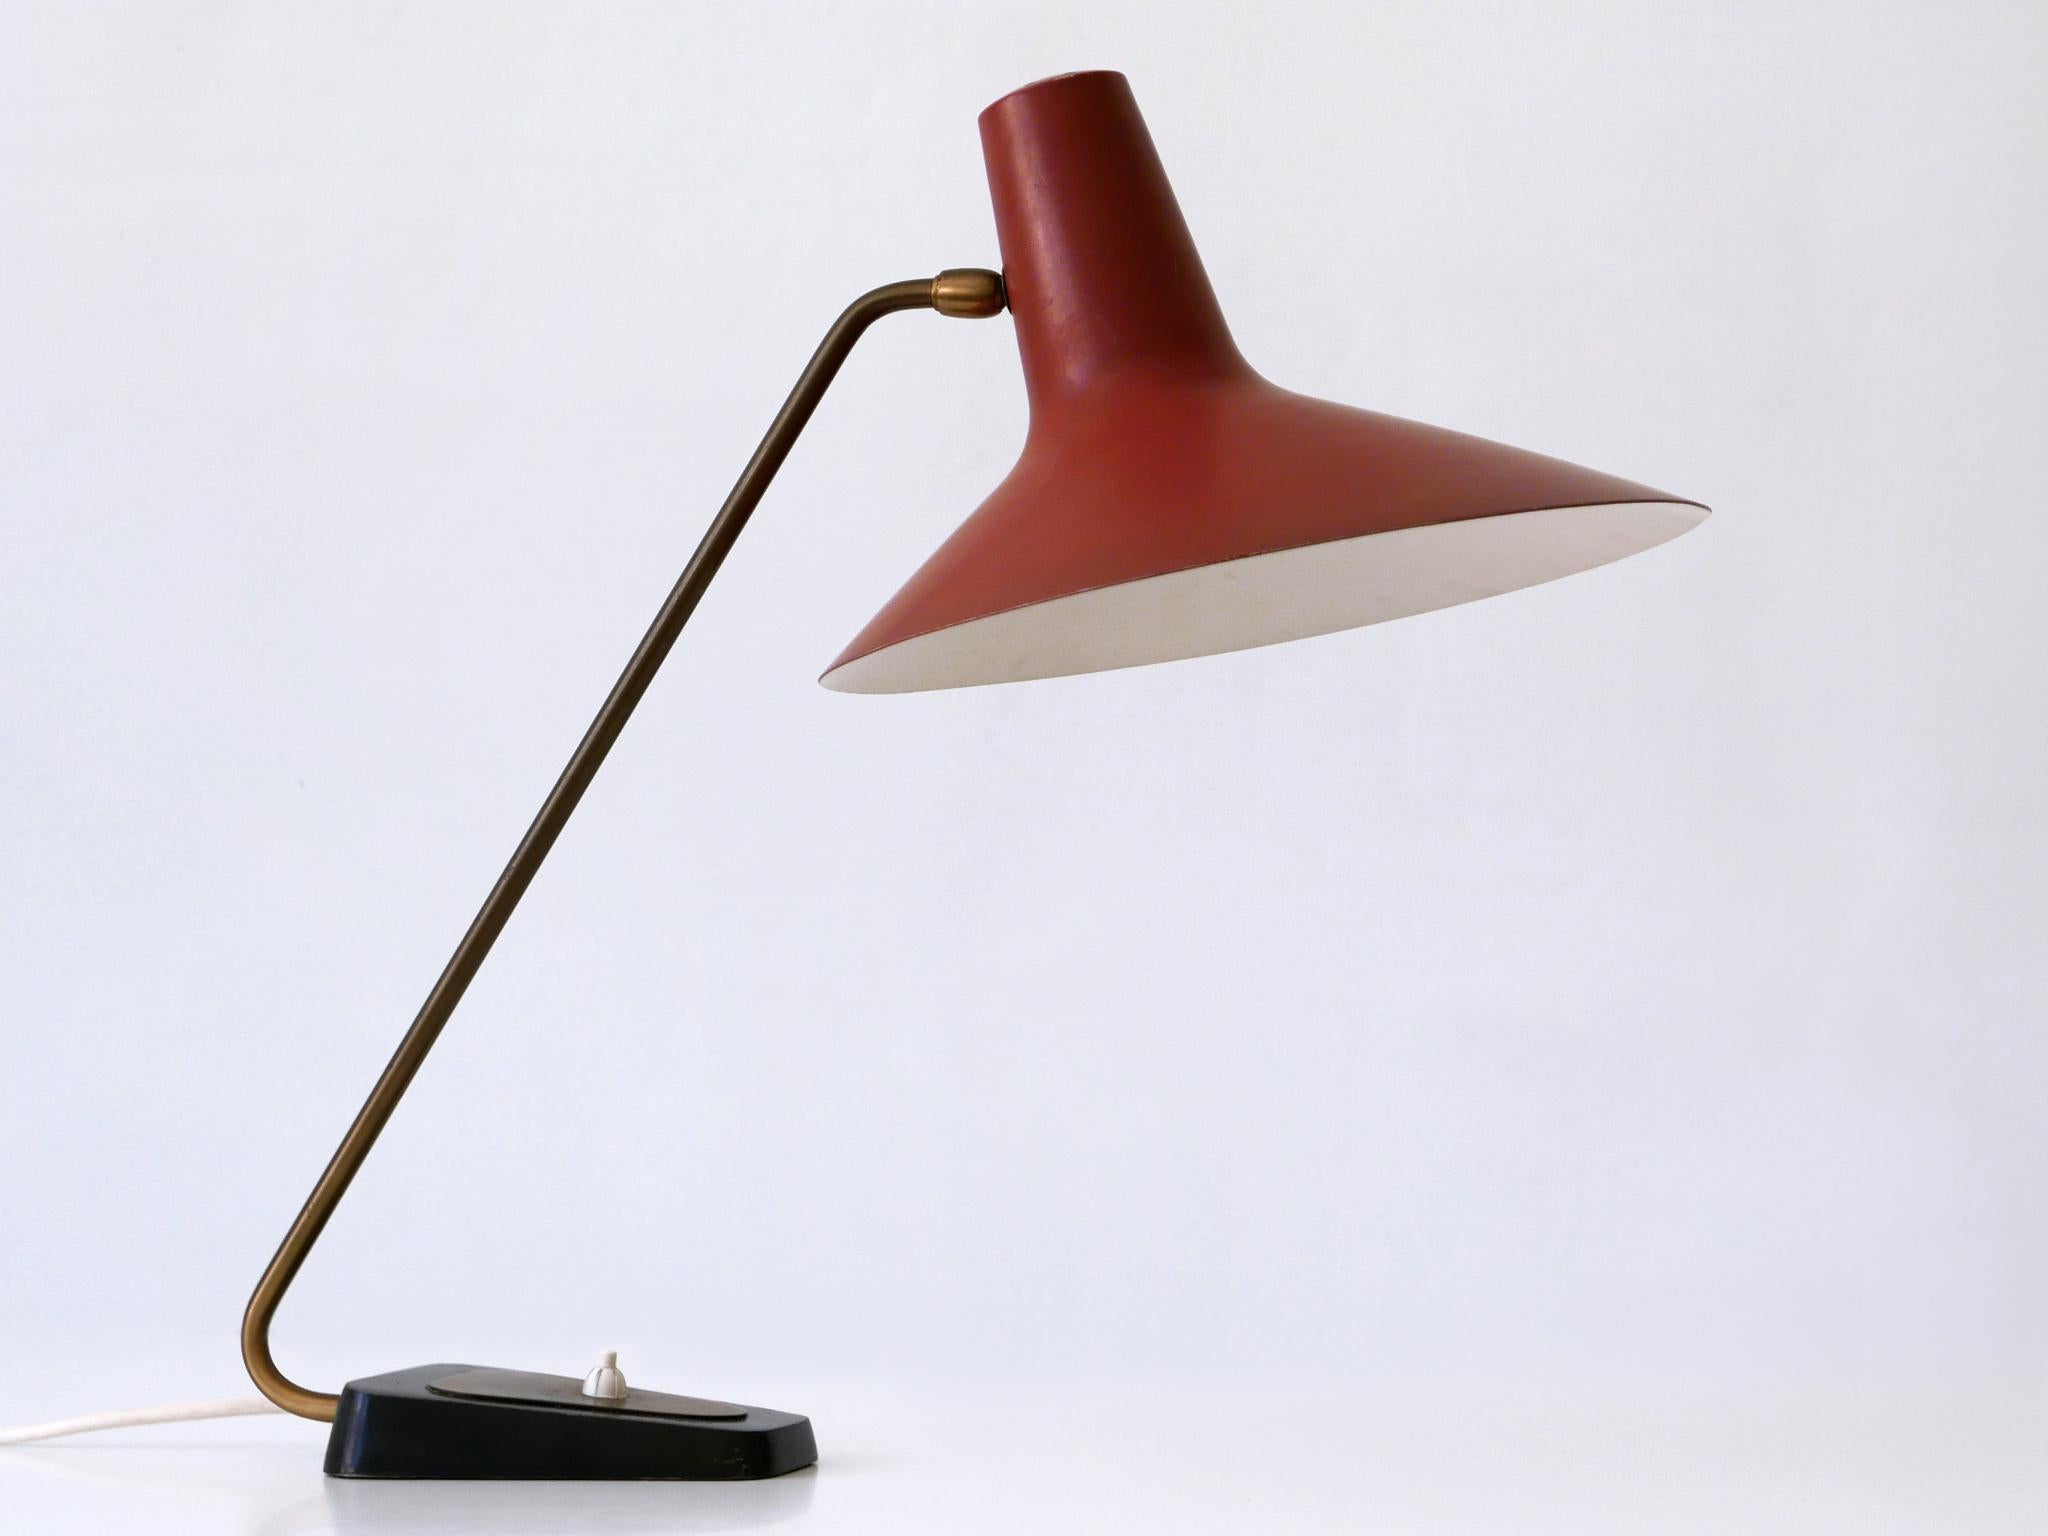 Exceptional Mid-Century Modern Table Lamp by Gebrüder Cosack Germany 1950s In Good Condition For Sale In Munich, DE